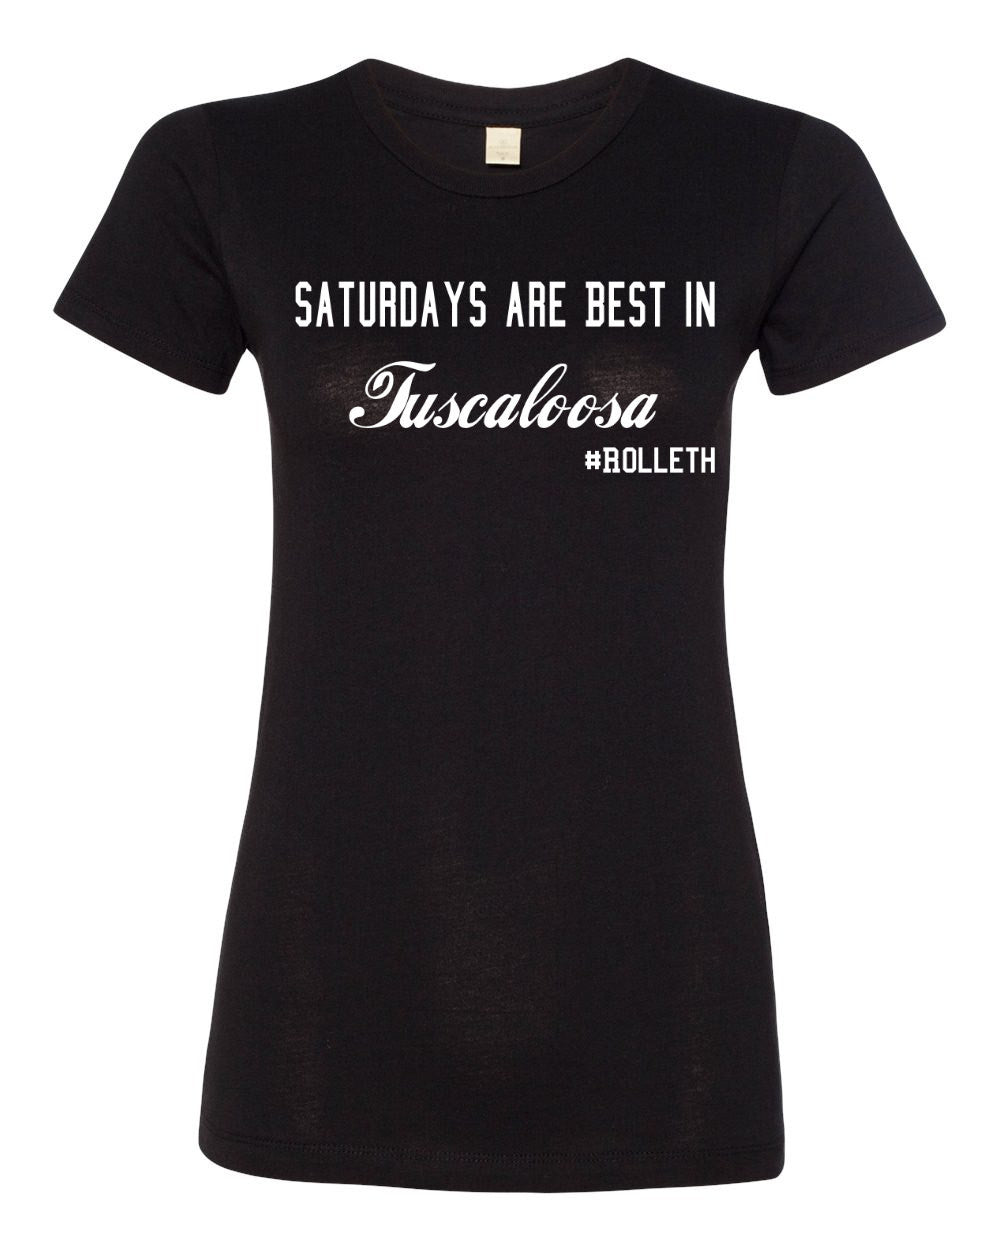 Saturdays Are Best in Tuscaloosa Football Tee for Women - Mattie and Mase